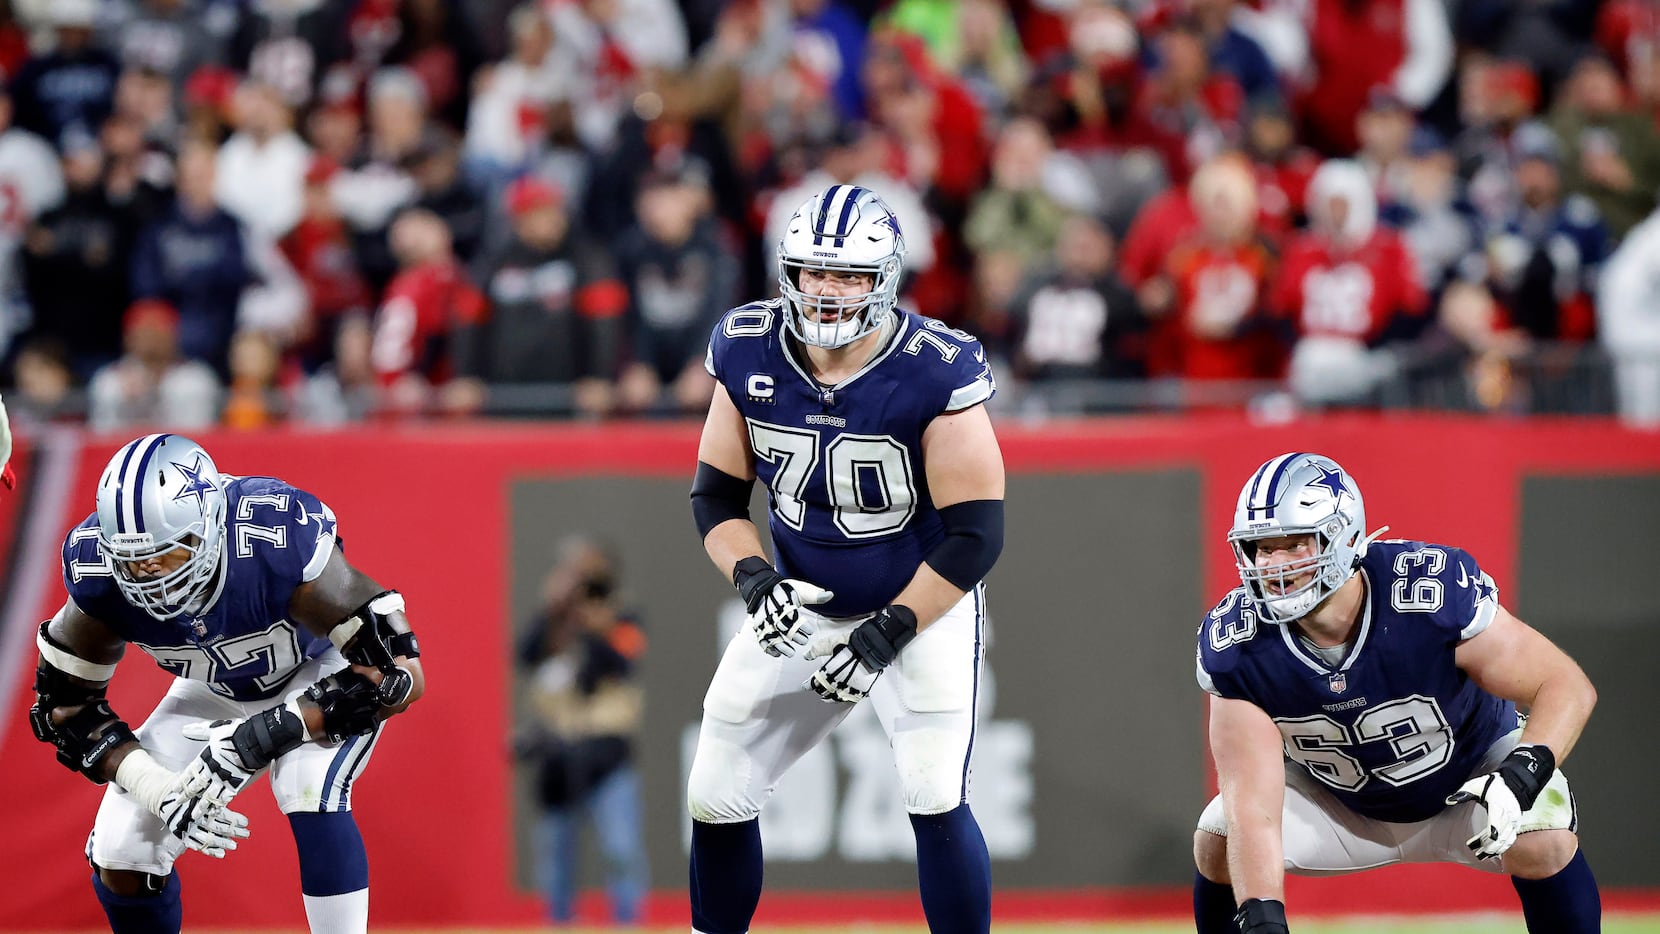 NFL Network's Brian Baldinger breaks down Cowboys OL issues, overall draft  class